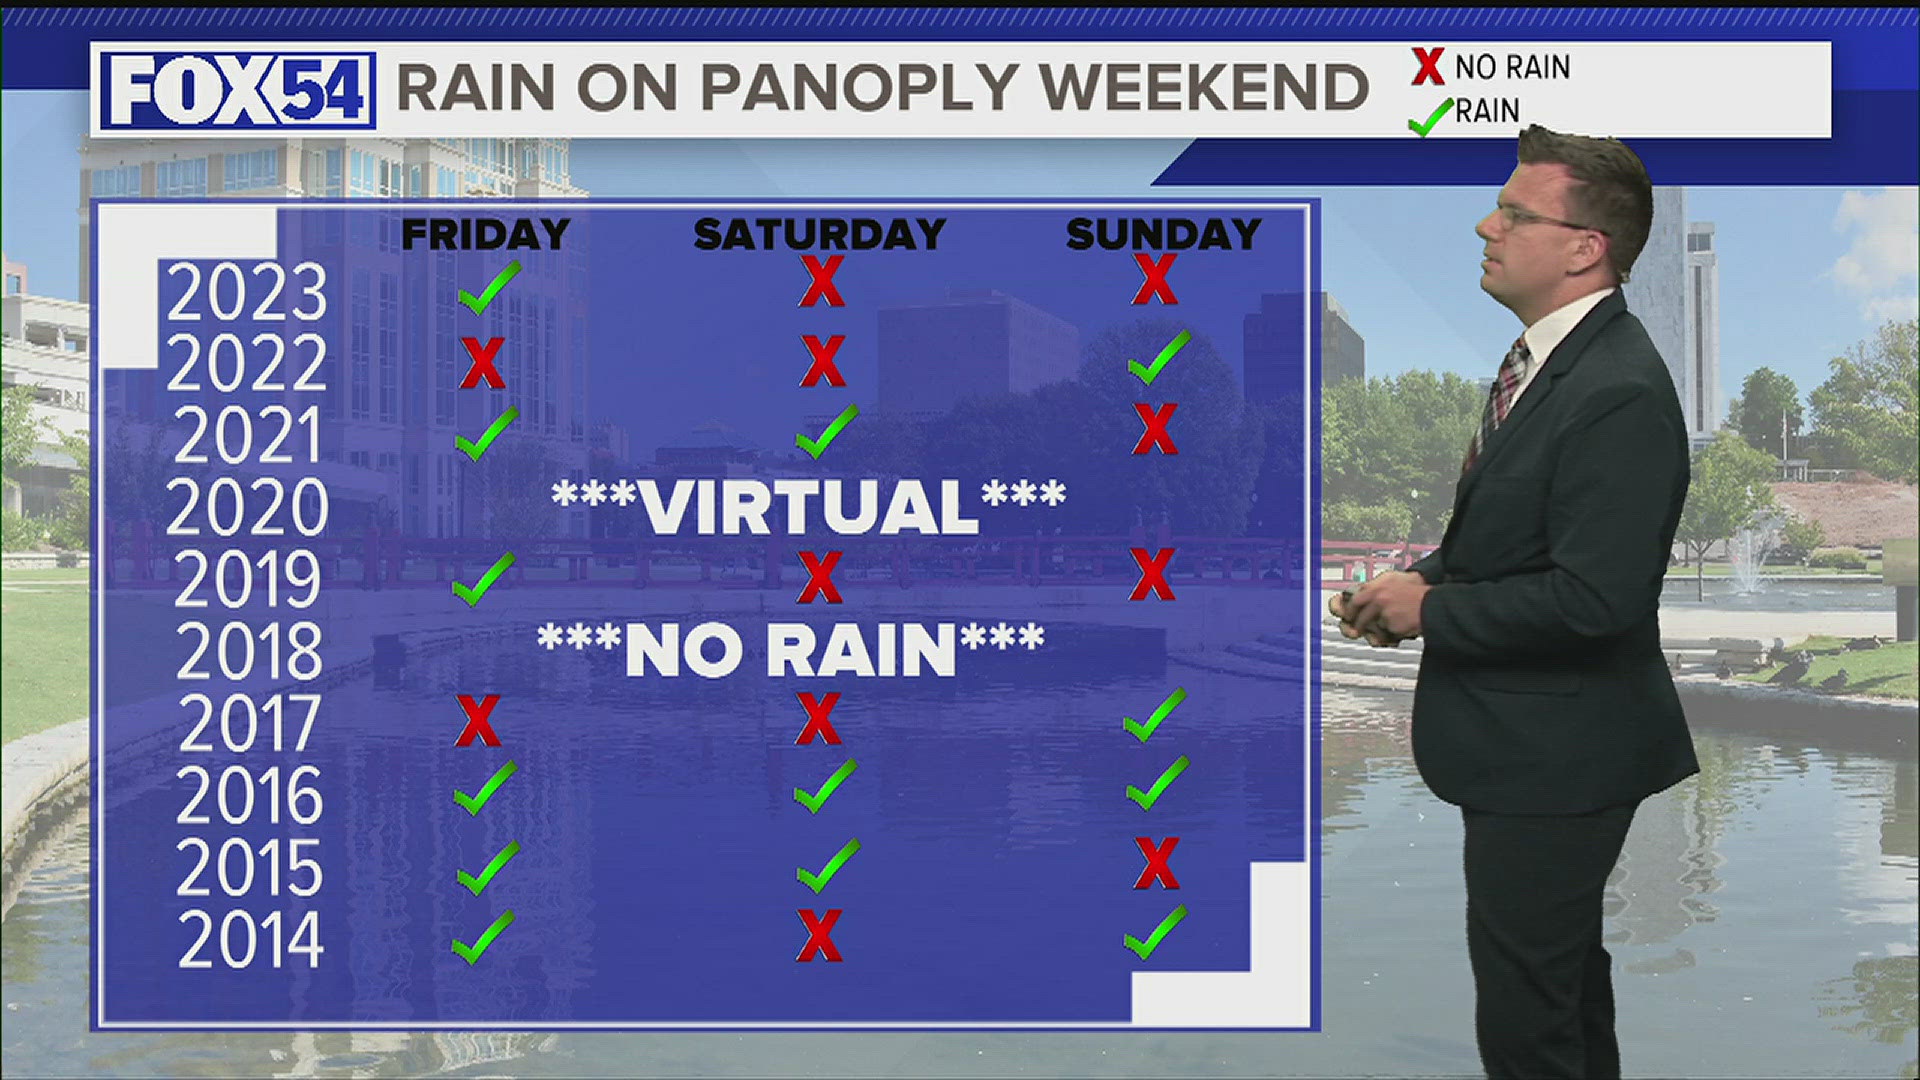 Isolated showers stay in the forecast this weekend as we approach Panoply, but there's lots of good news in the forecast.